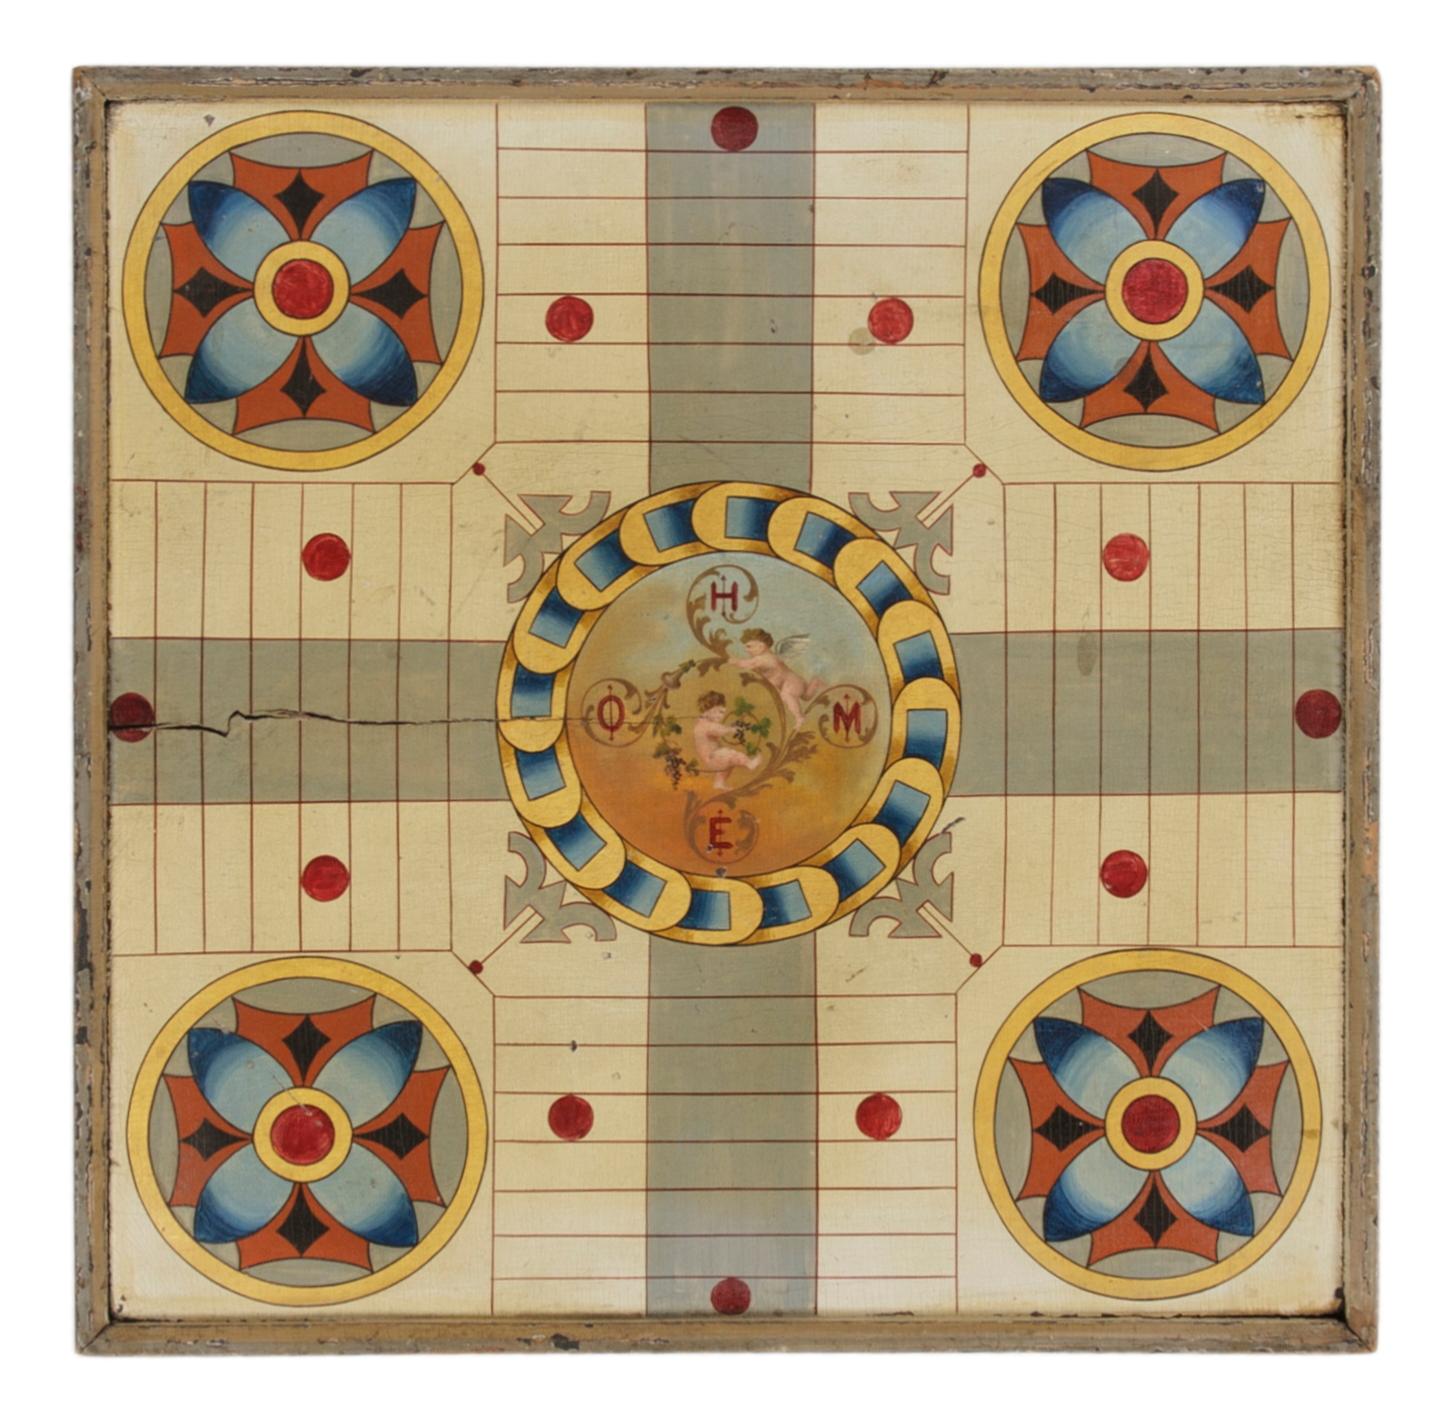 Masterpiece quality American game board with fancifully painted cherubs, ca 1870

This is one of the greatest American painted Parcheesi boards extant. The fine quality of this is unmatched by anything I have seen in recent years. The attractive